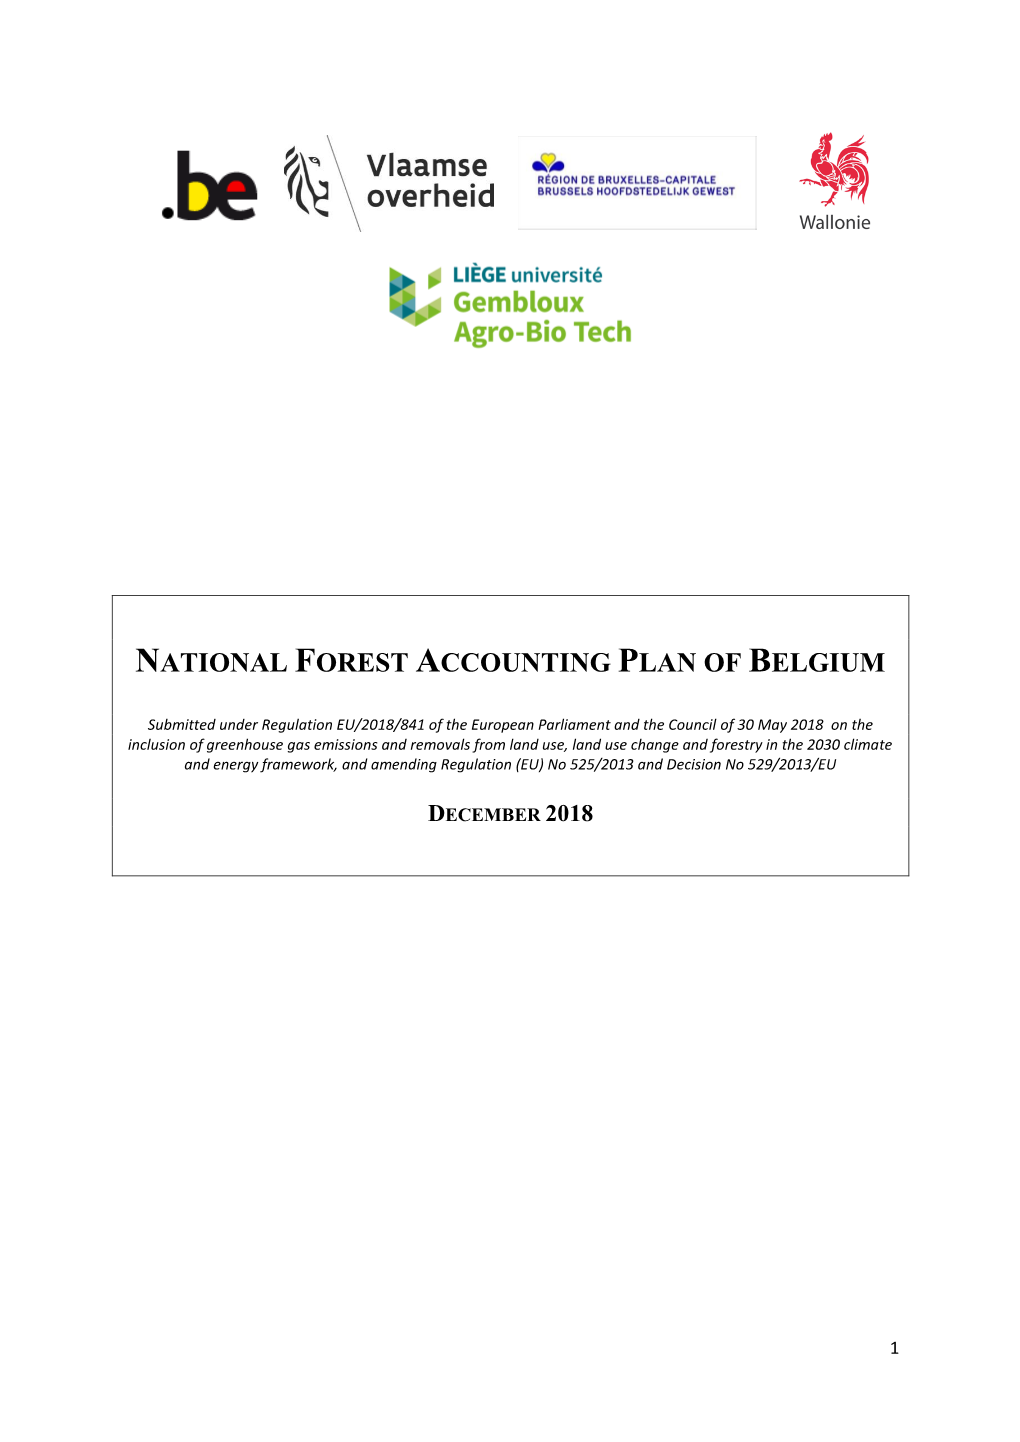 National Forest Accounting Plan of Belgium